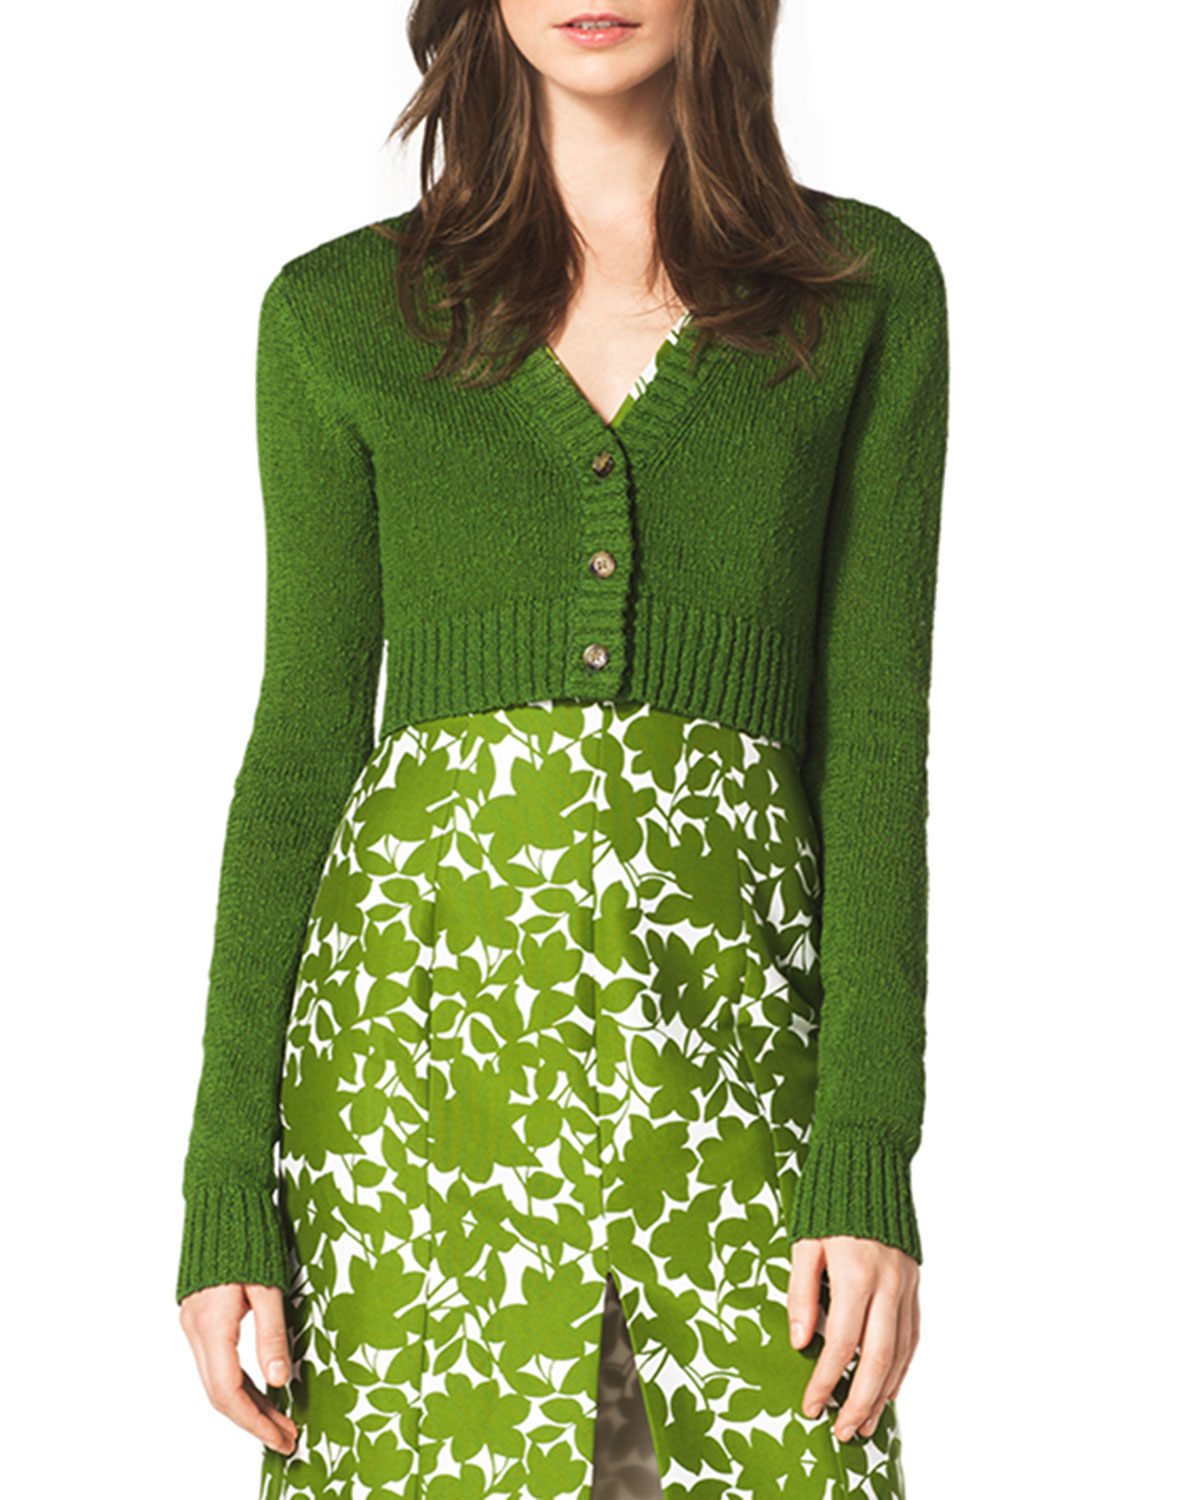 Lyst - Michael Kors Cropped Cashmere Cardigan in Green